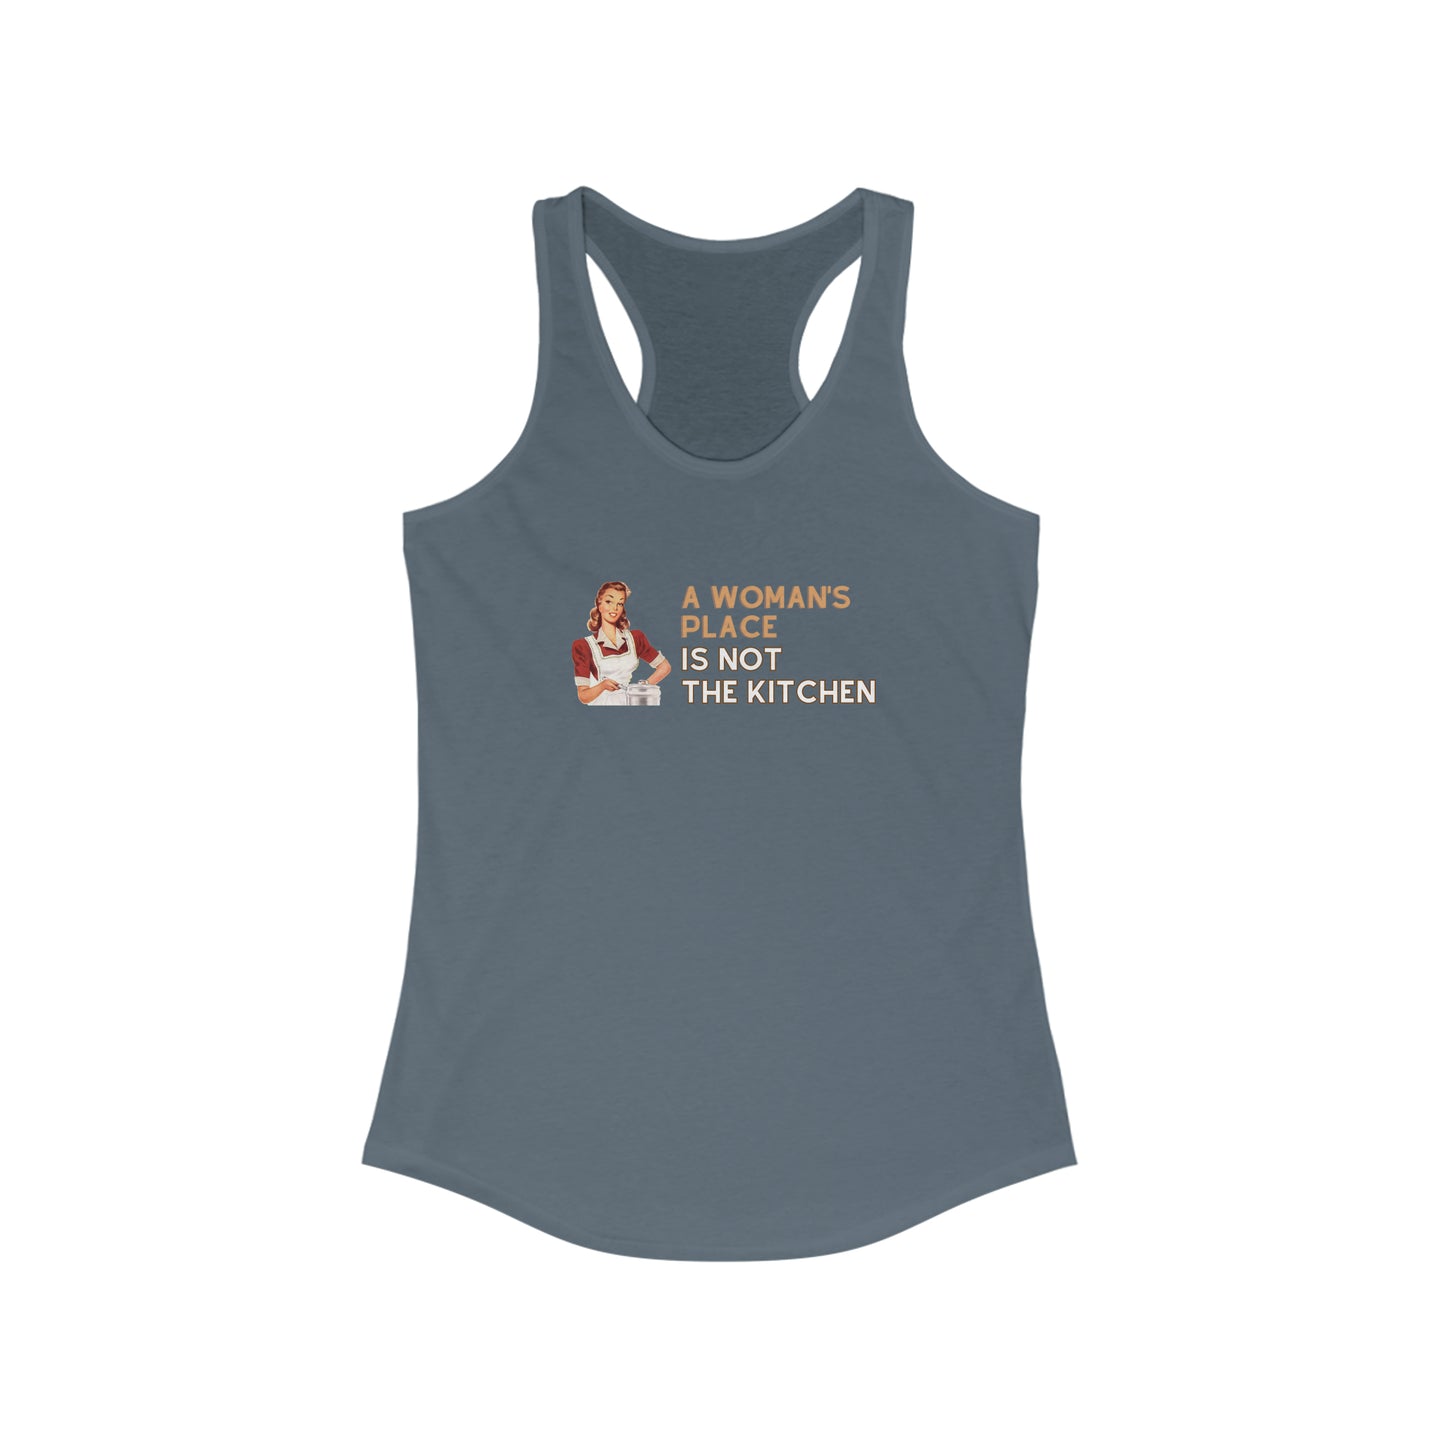 A Woman's Place Is Not The Kitchen Racerback Pickleball Tank Top